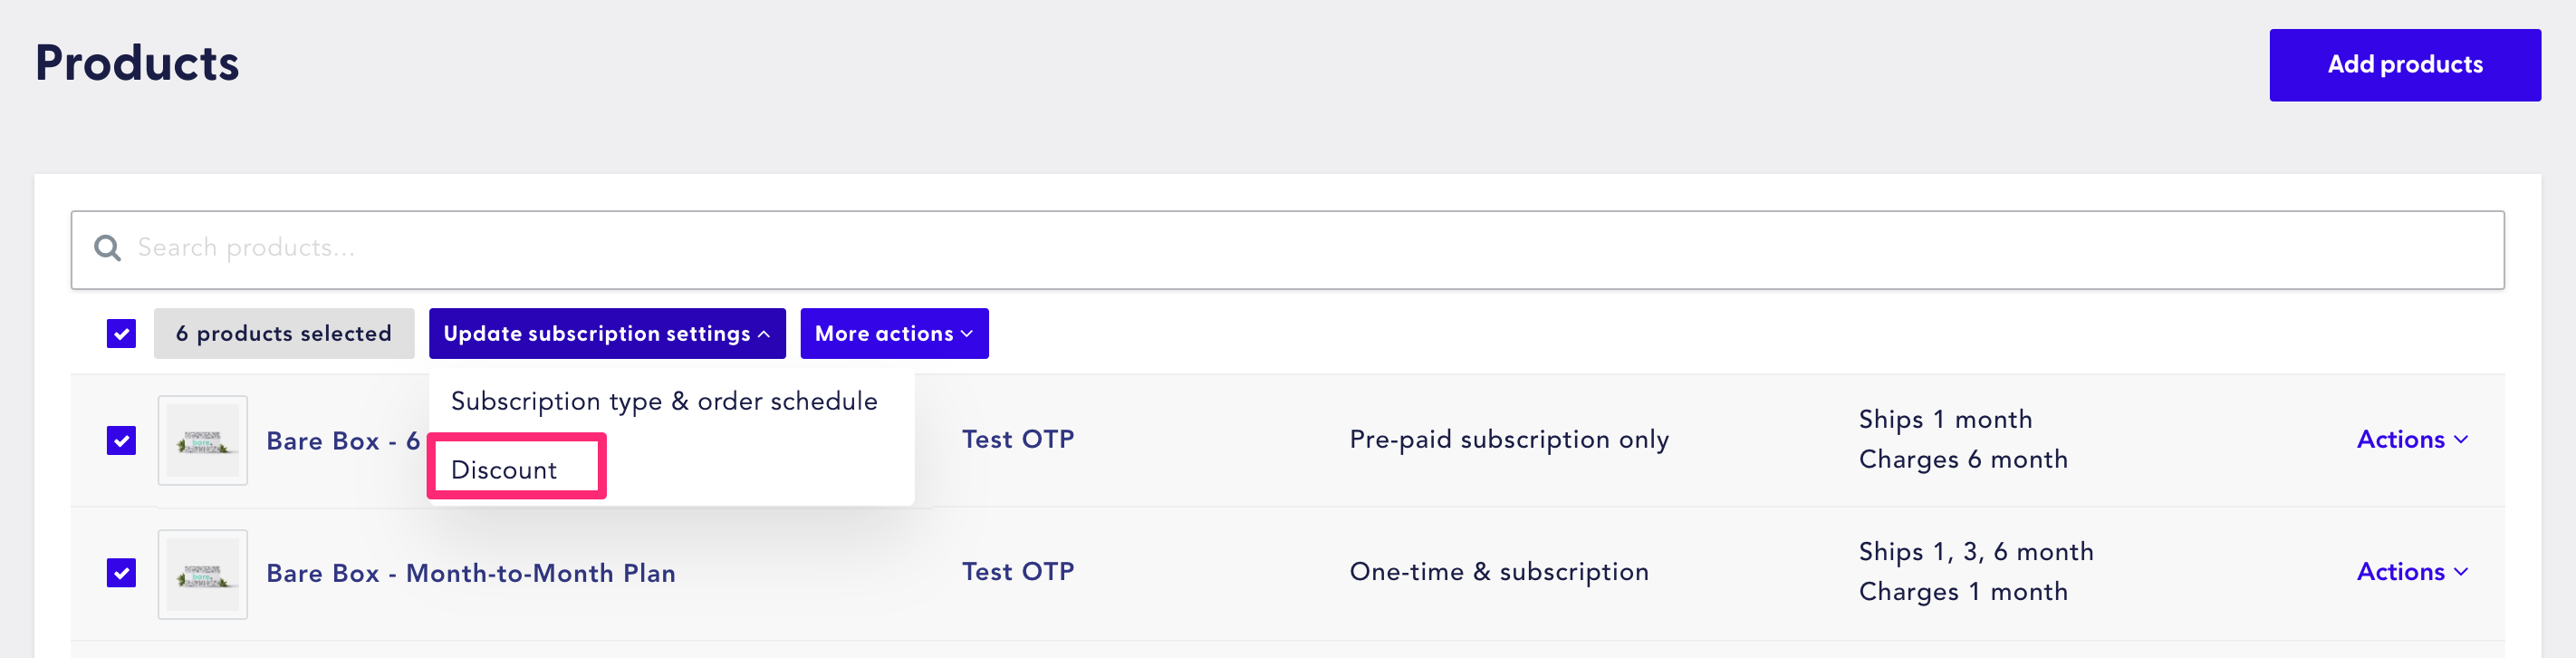 update subscription discount settings on bulk product settings